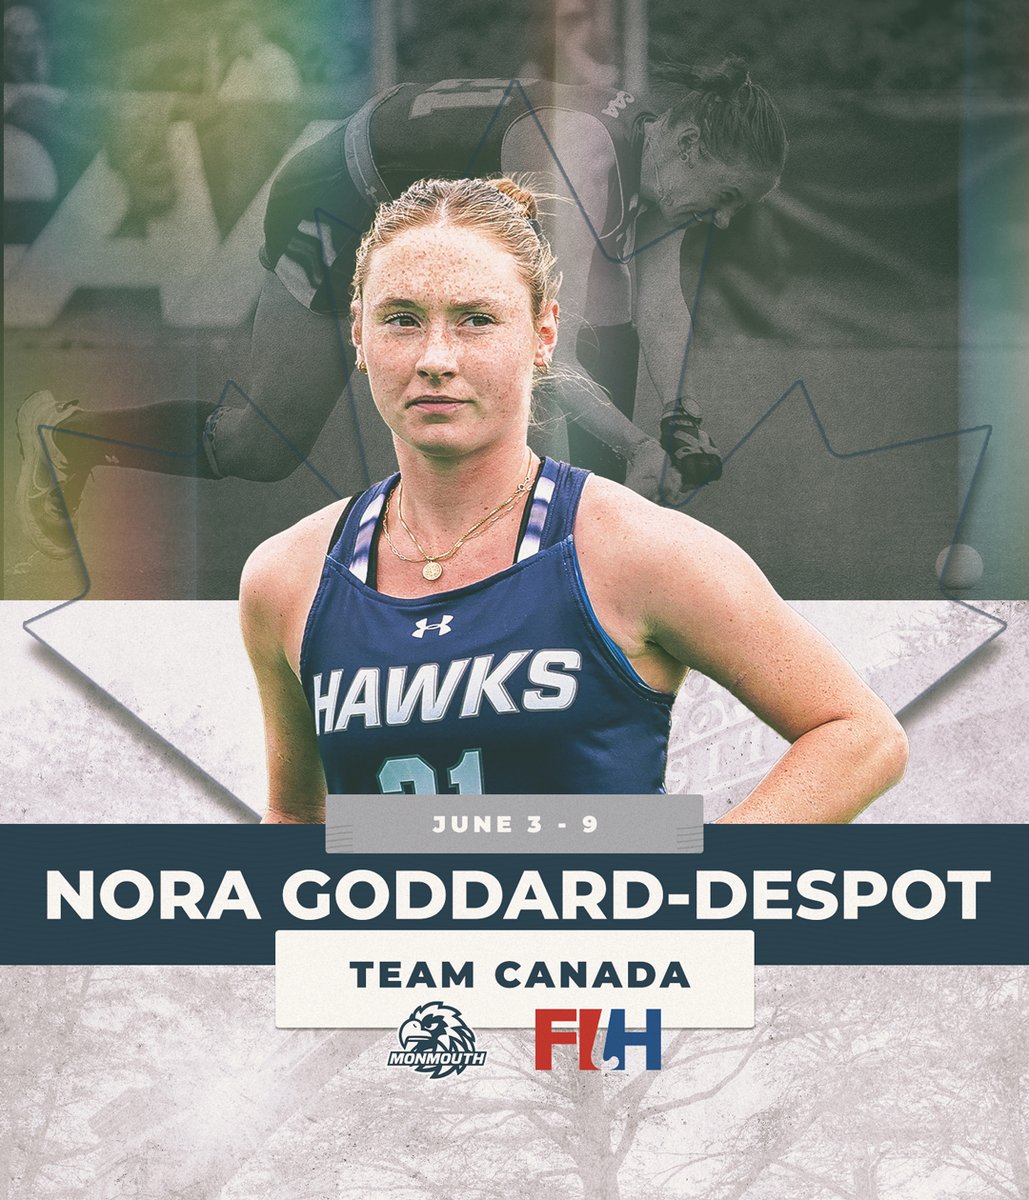 O Canada! 🇨🇦 Nora Goddard-Despot will represent @MonmouthFH at the 2024 FIH Nations Cup in Terassa, Spain this June! #FlyHawks